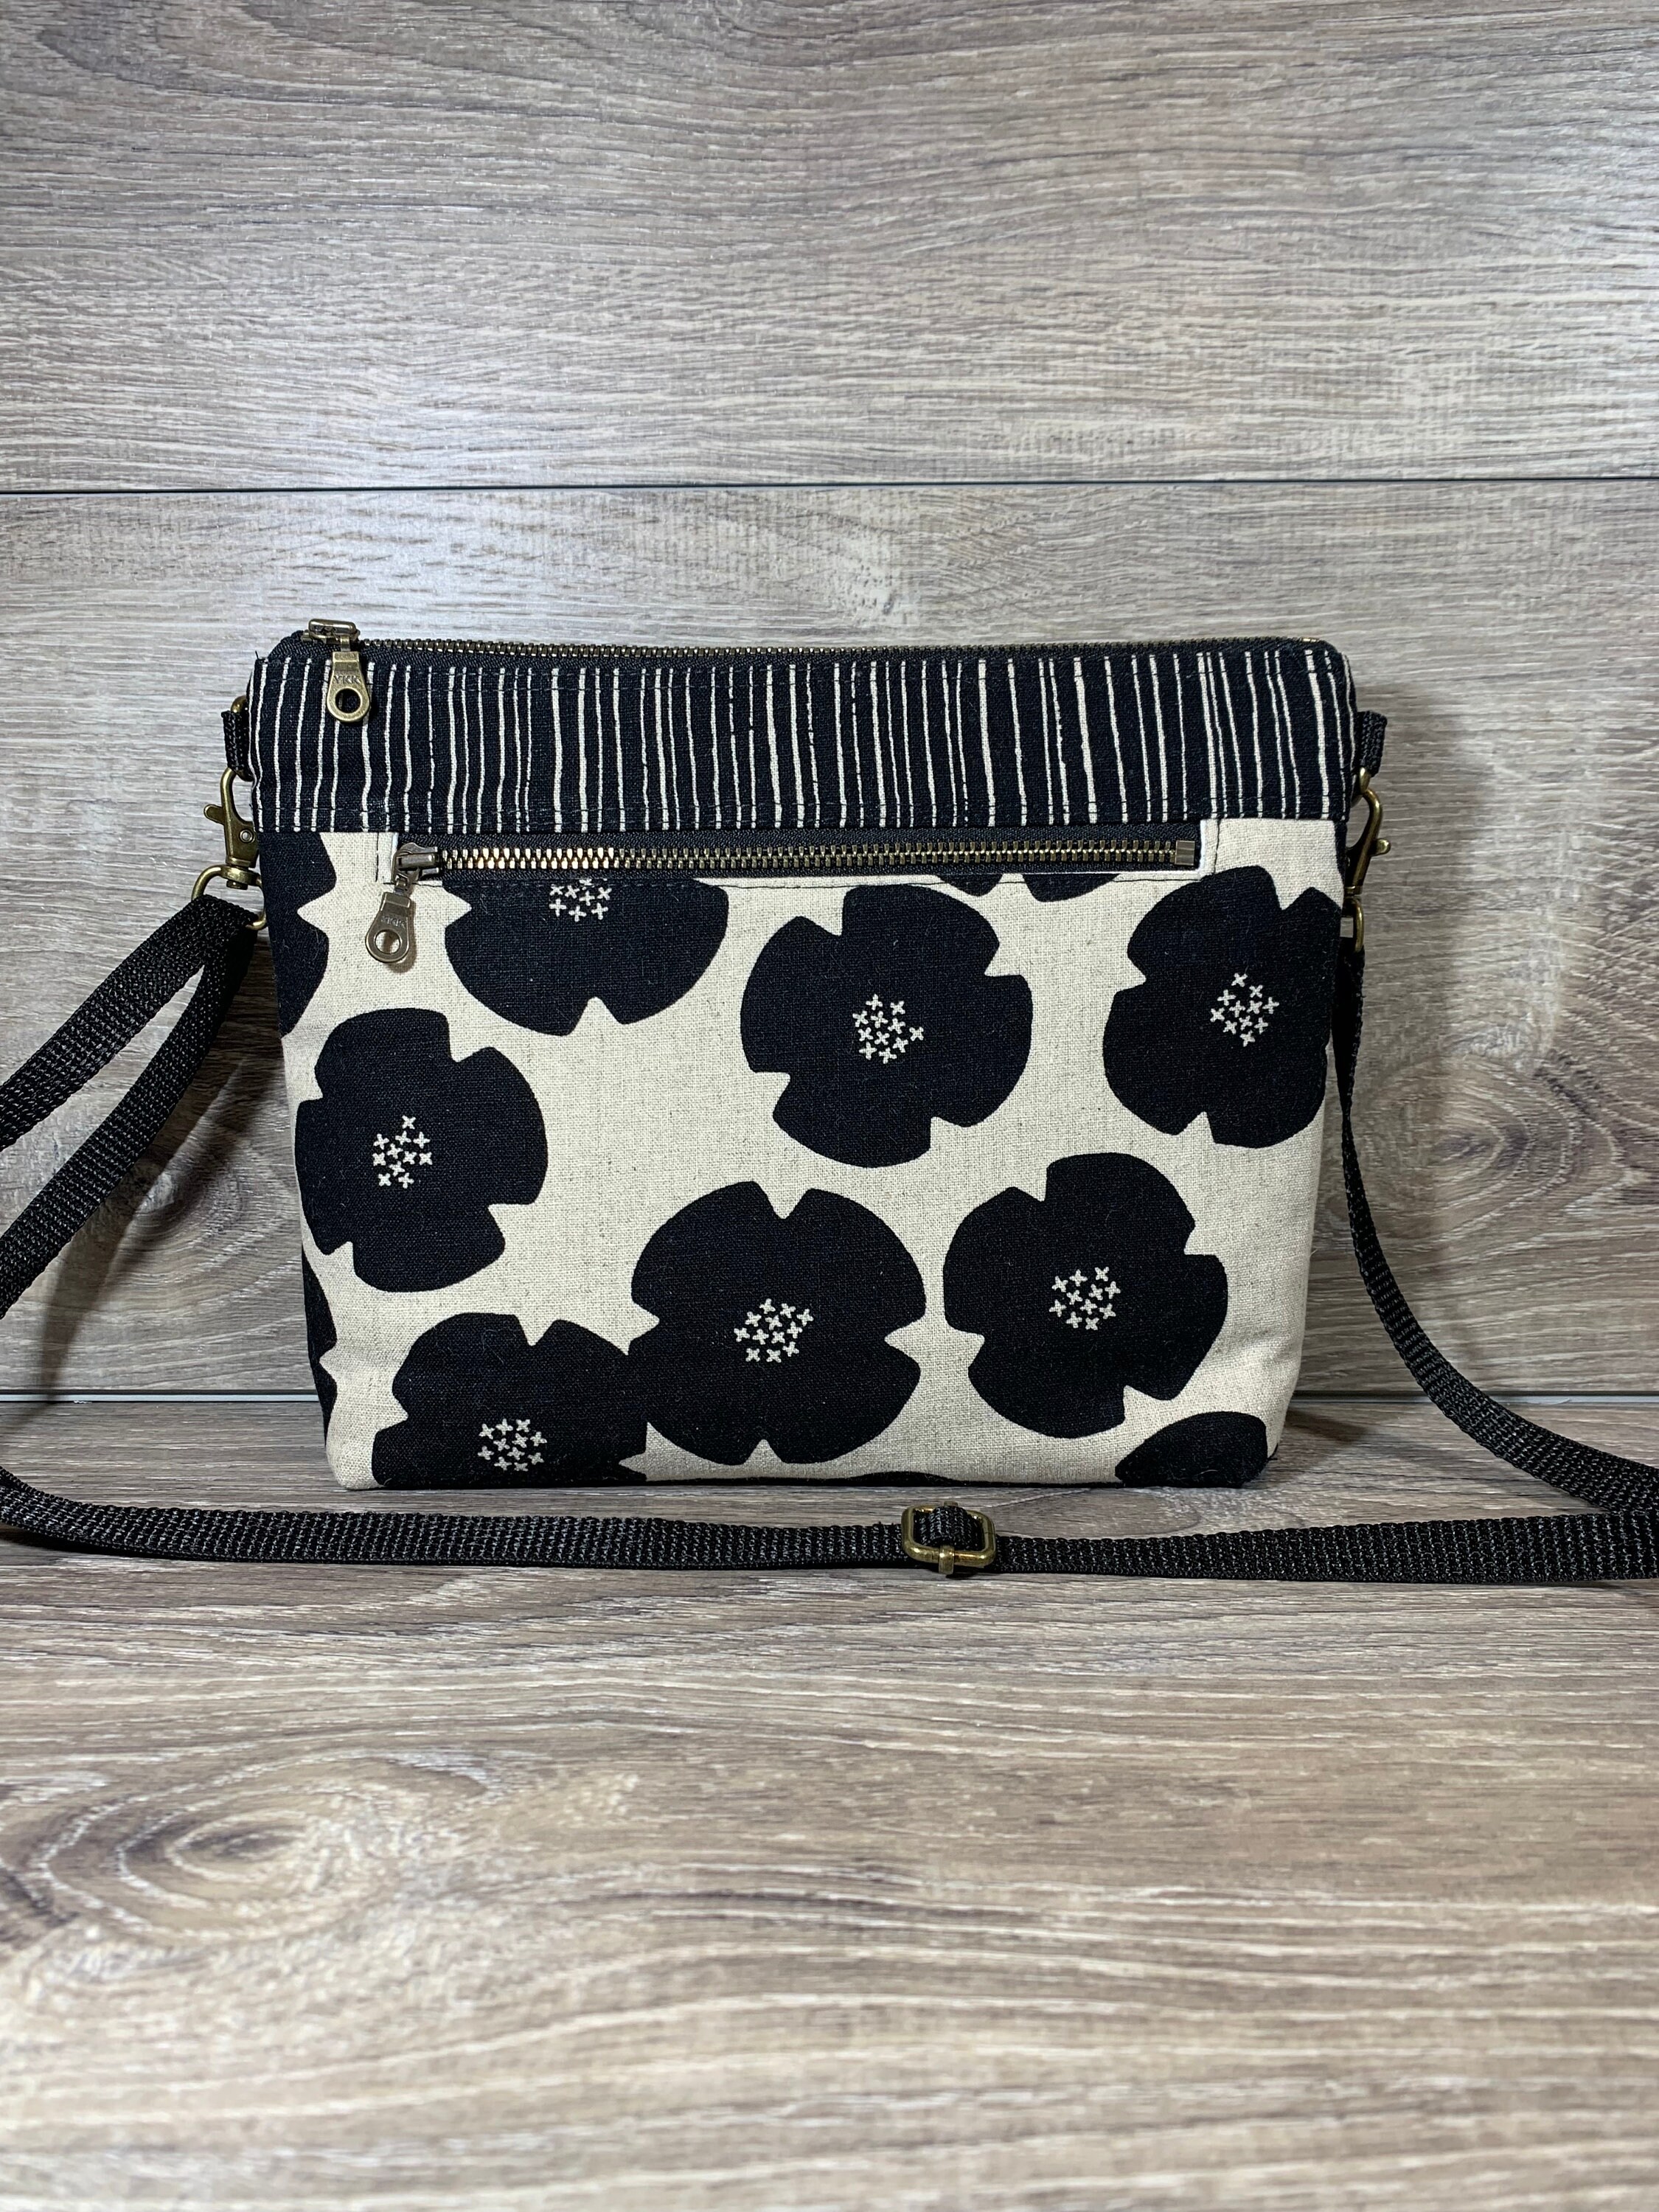 Daisy Rose Phone Holder Wallet and Cross Body Bag - RFID Blocking Wristlet  with Card Slots and Zip Pocket -PU Vegan Leather - Cream Checkered 